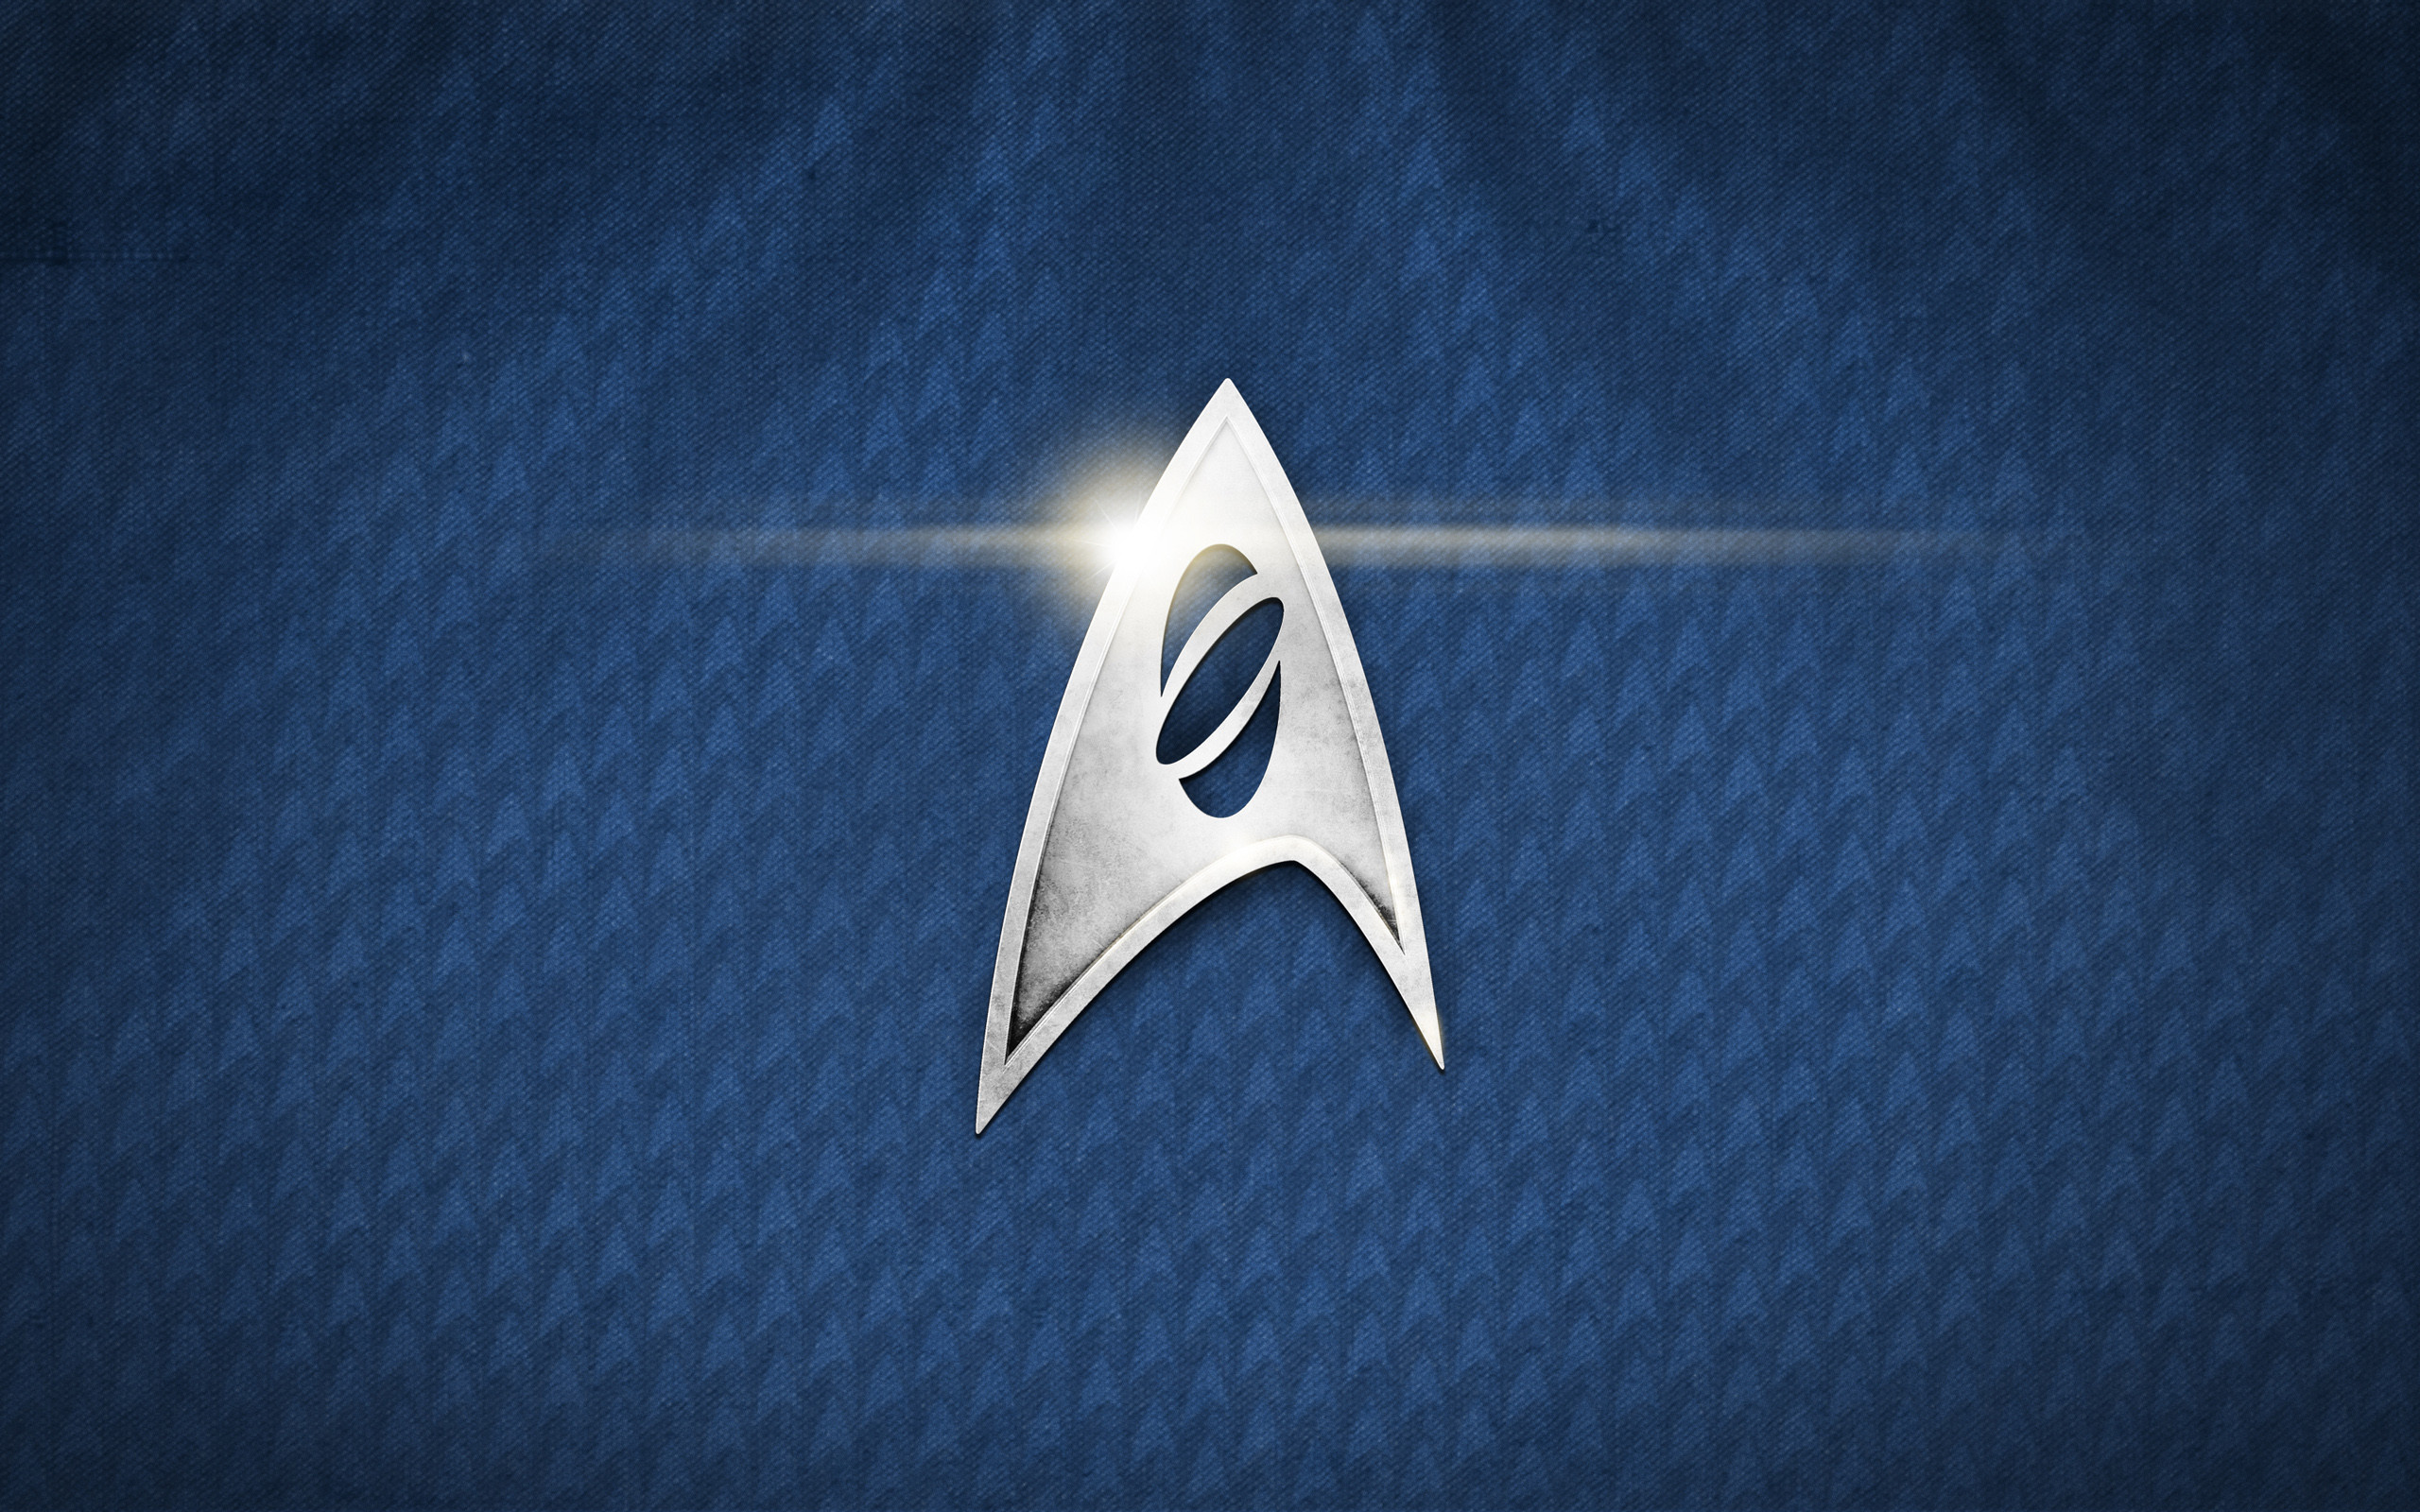 Star Trek Wallpapers Awesome Wallpapers